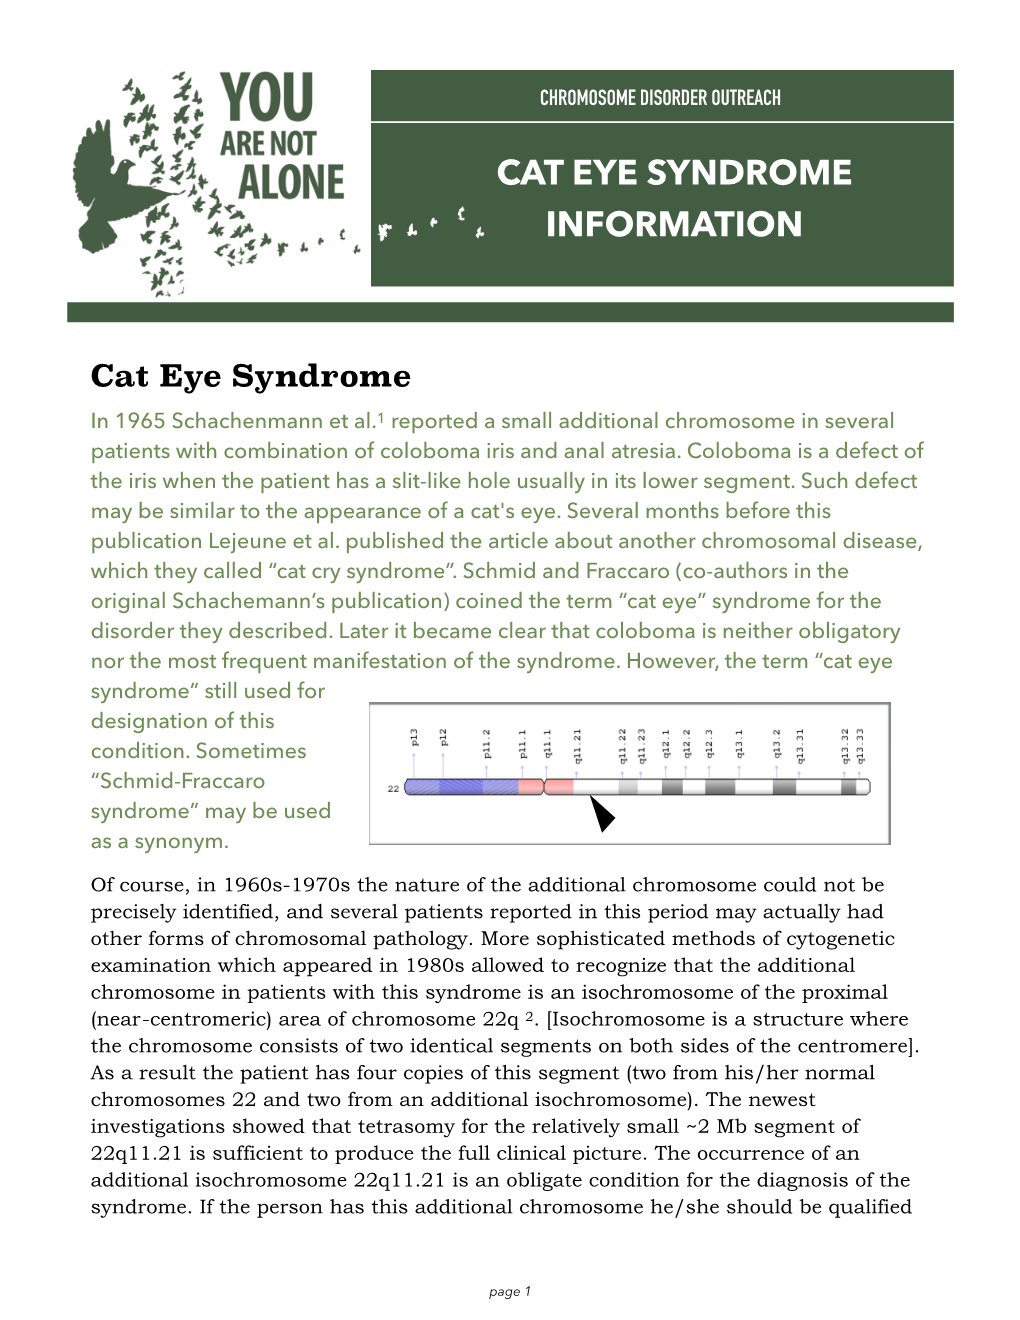 Cat Eye Syndrome Information